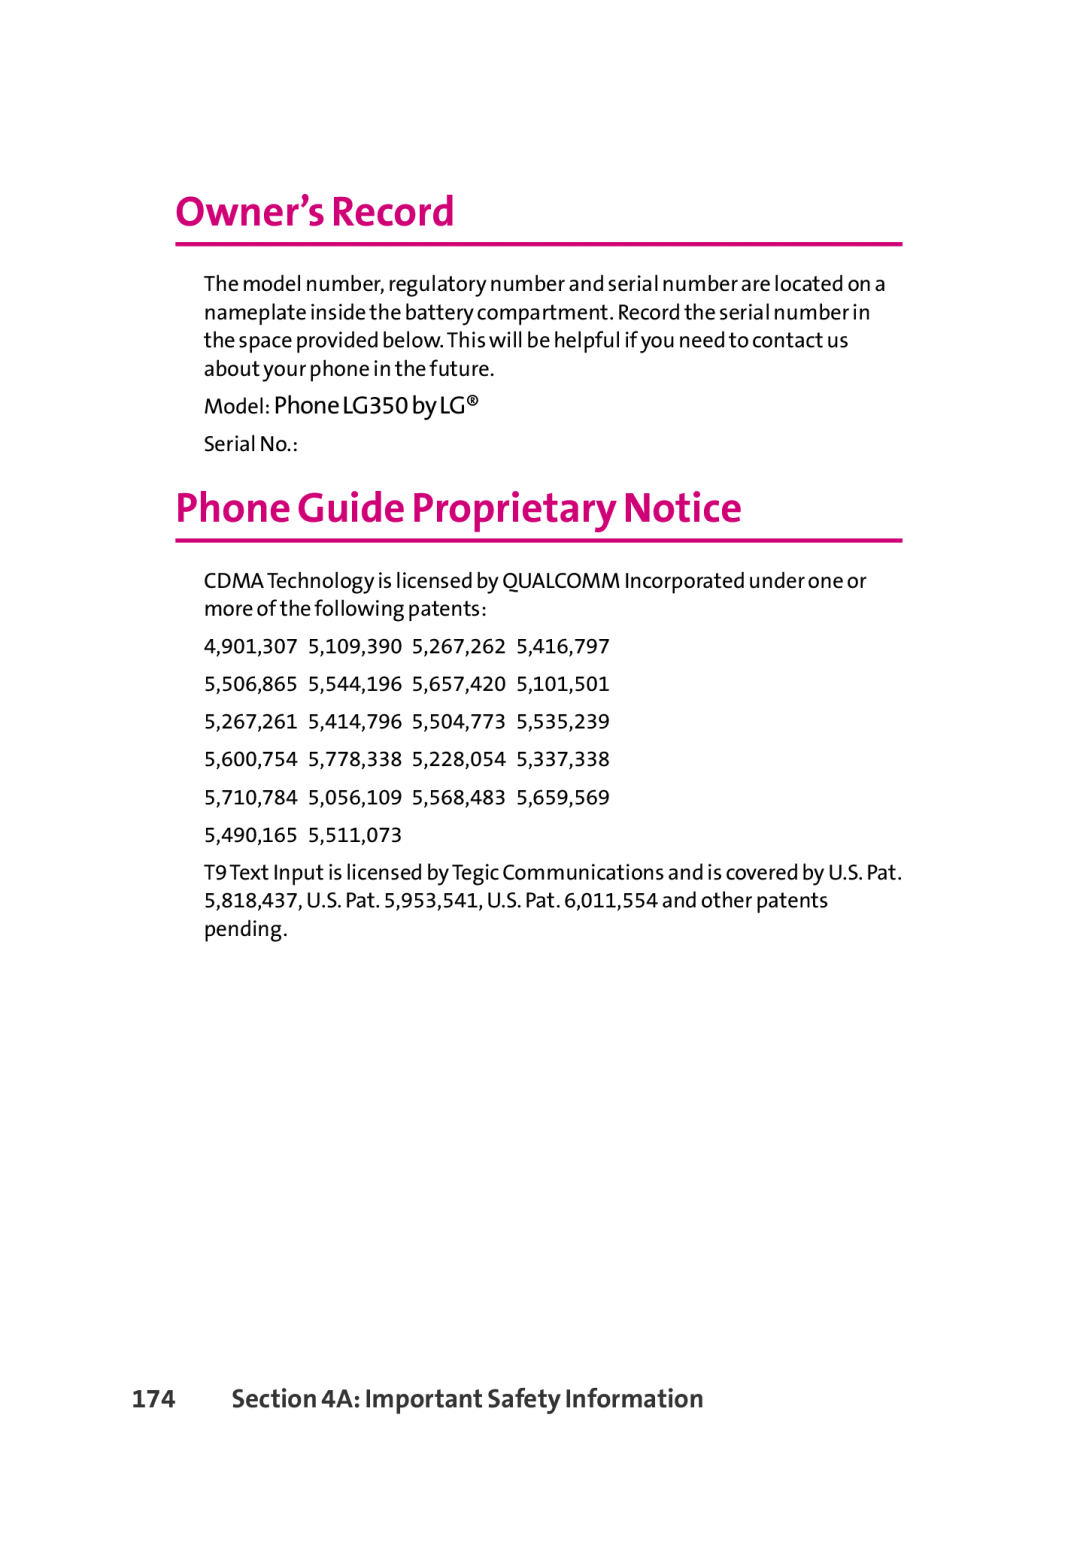 LG Electronics 350 manual Owner’s Record, Phone Guide Proprietary Notice, A Important Safety Information 